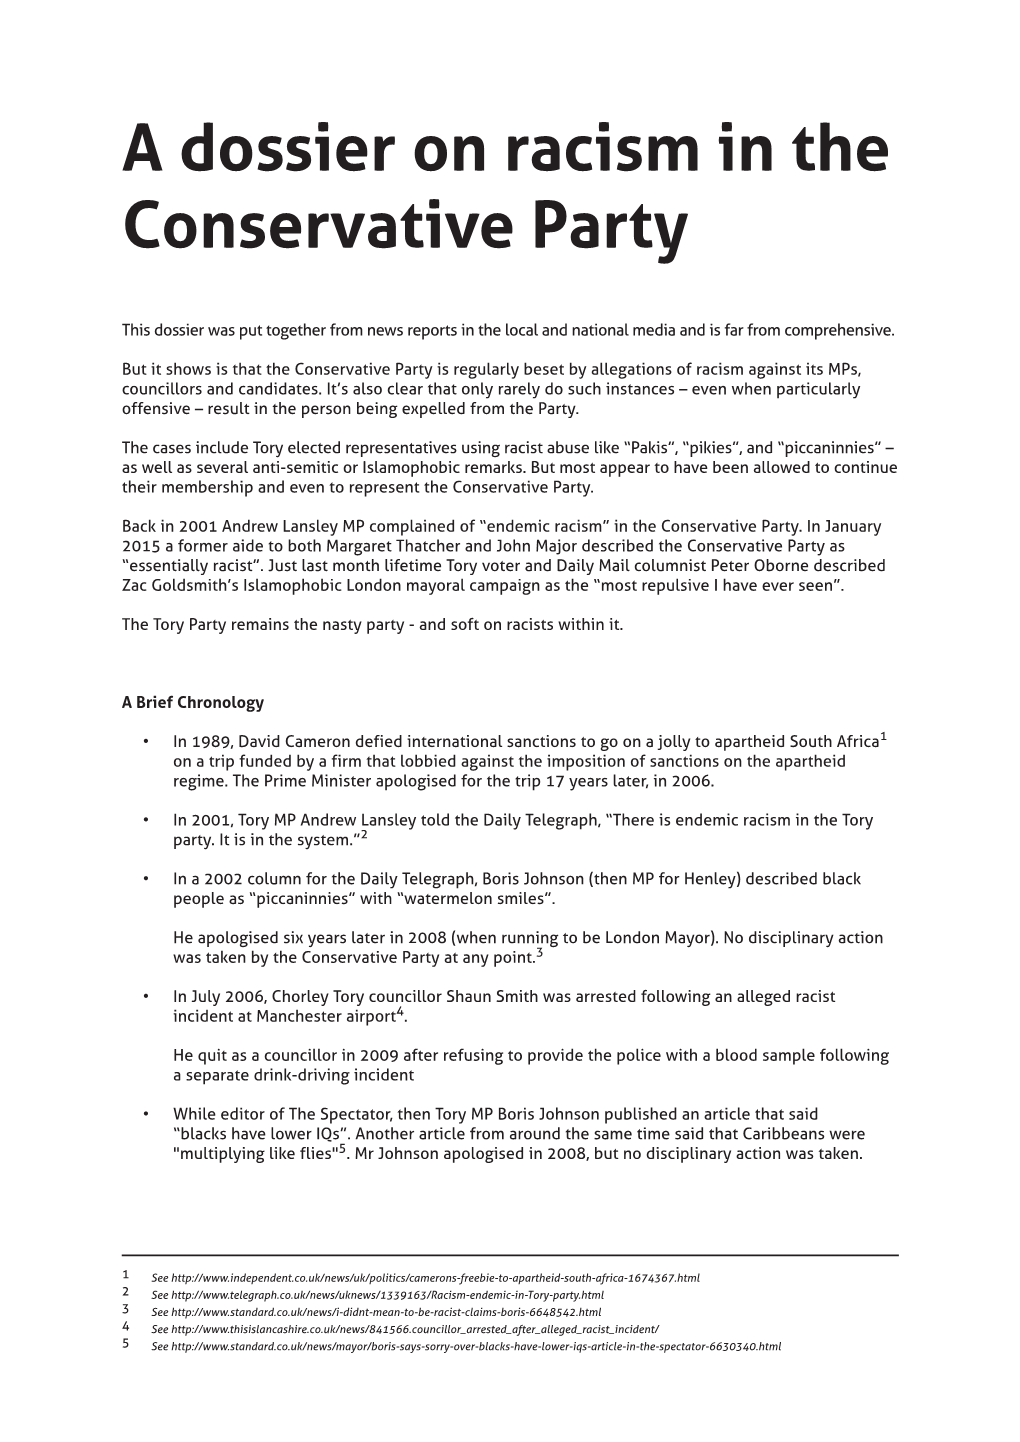 A Dossier on Racism in the Conservative Party